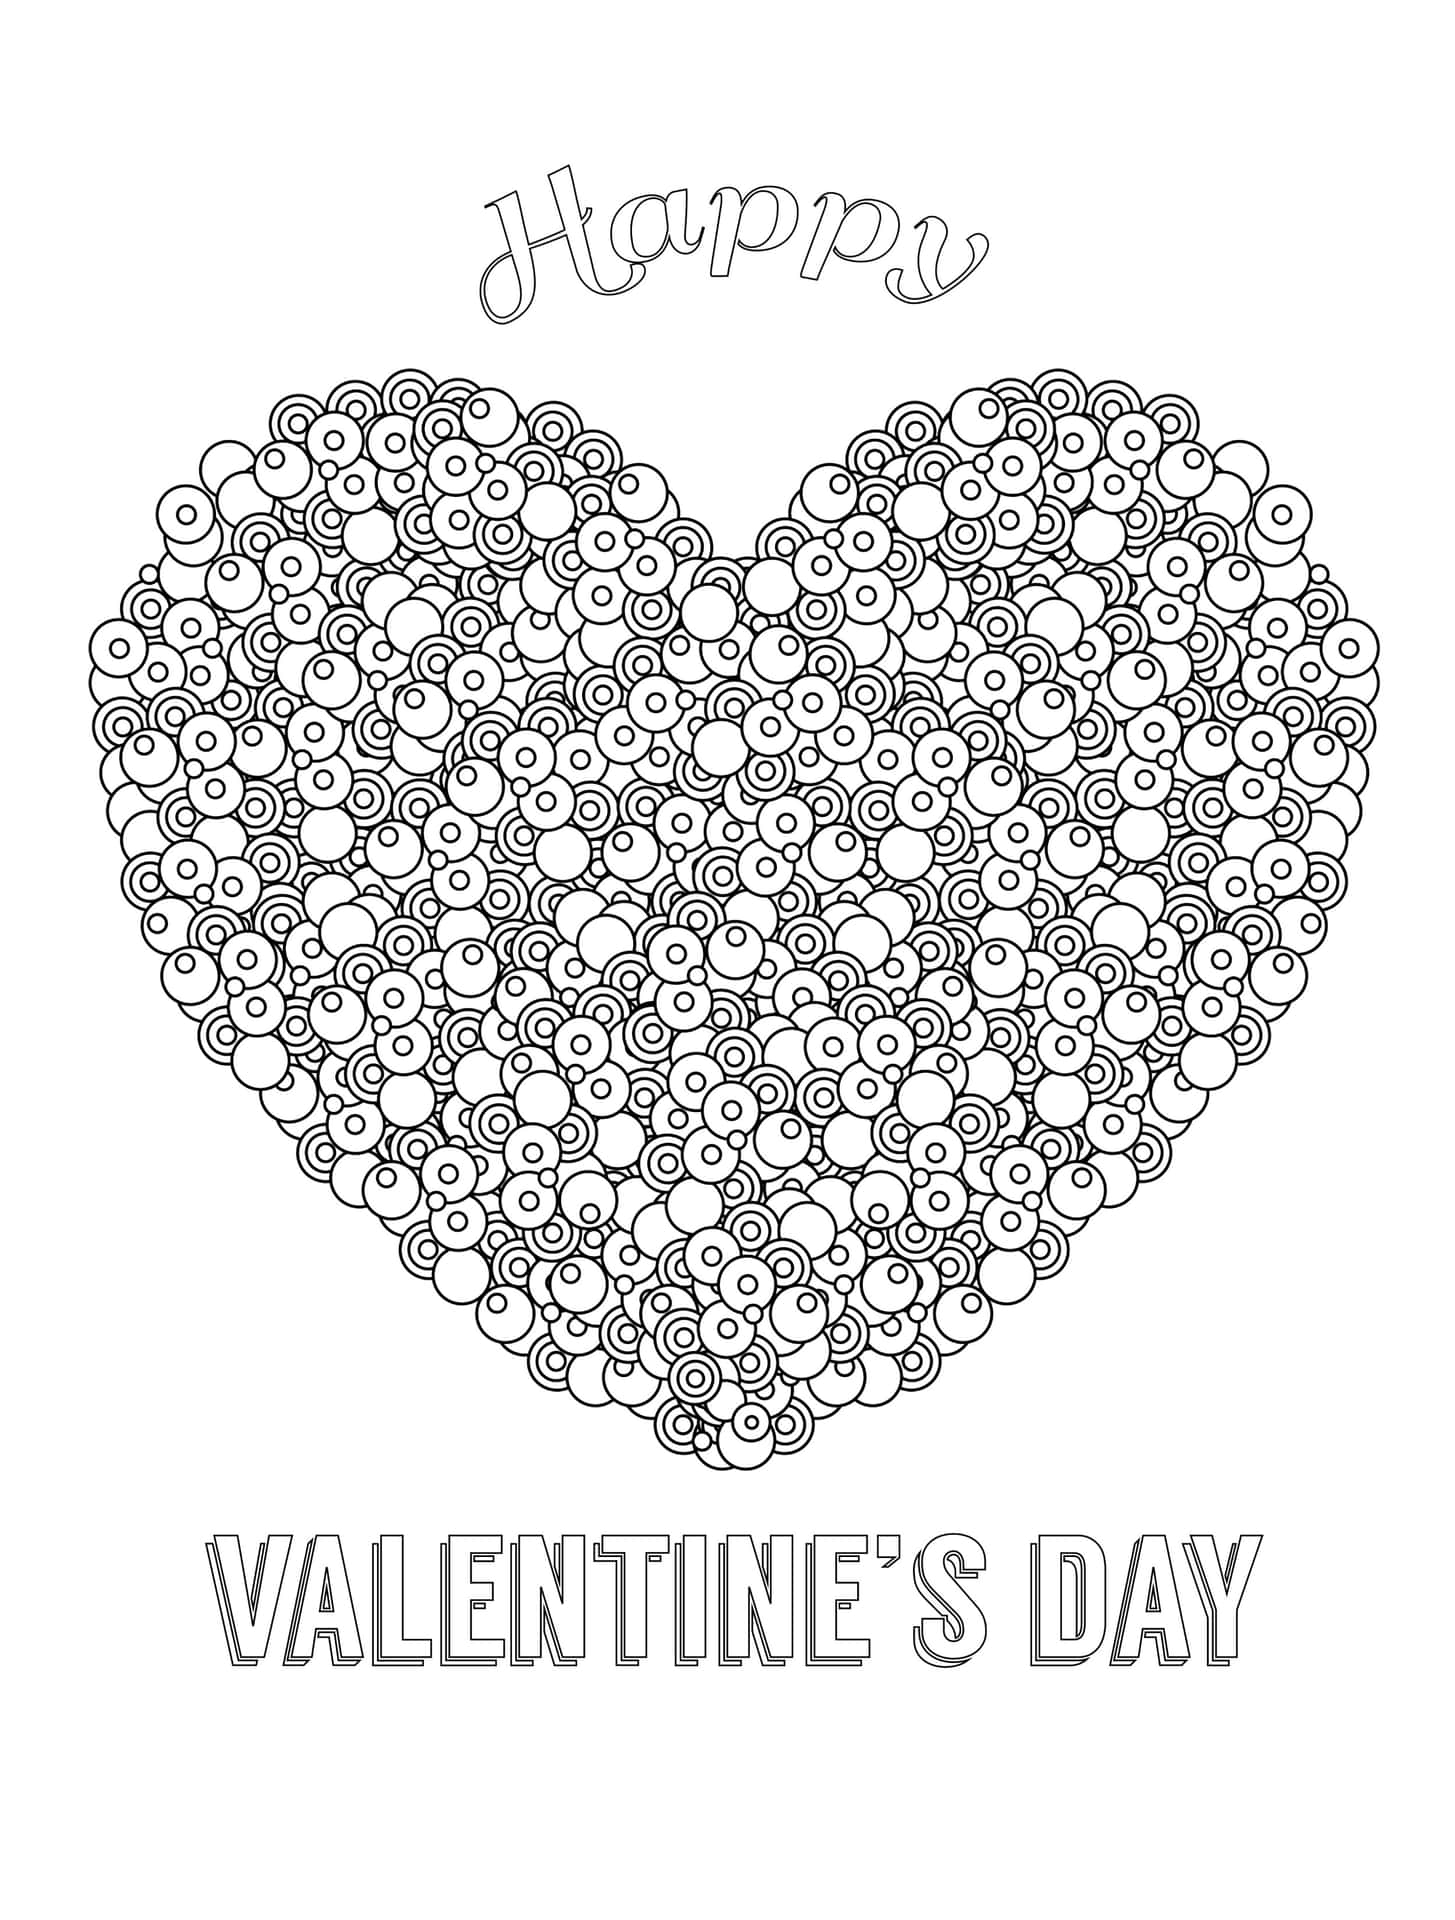 Valentine's Day Coloring Page With Hearts